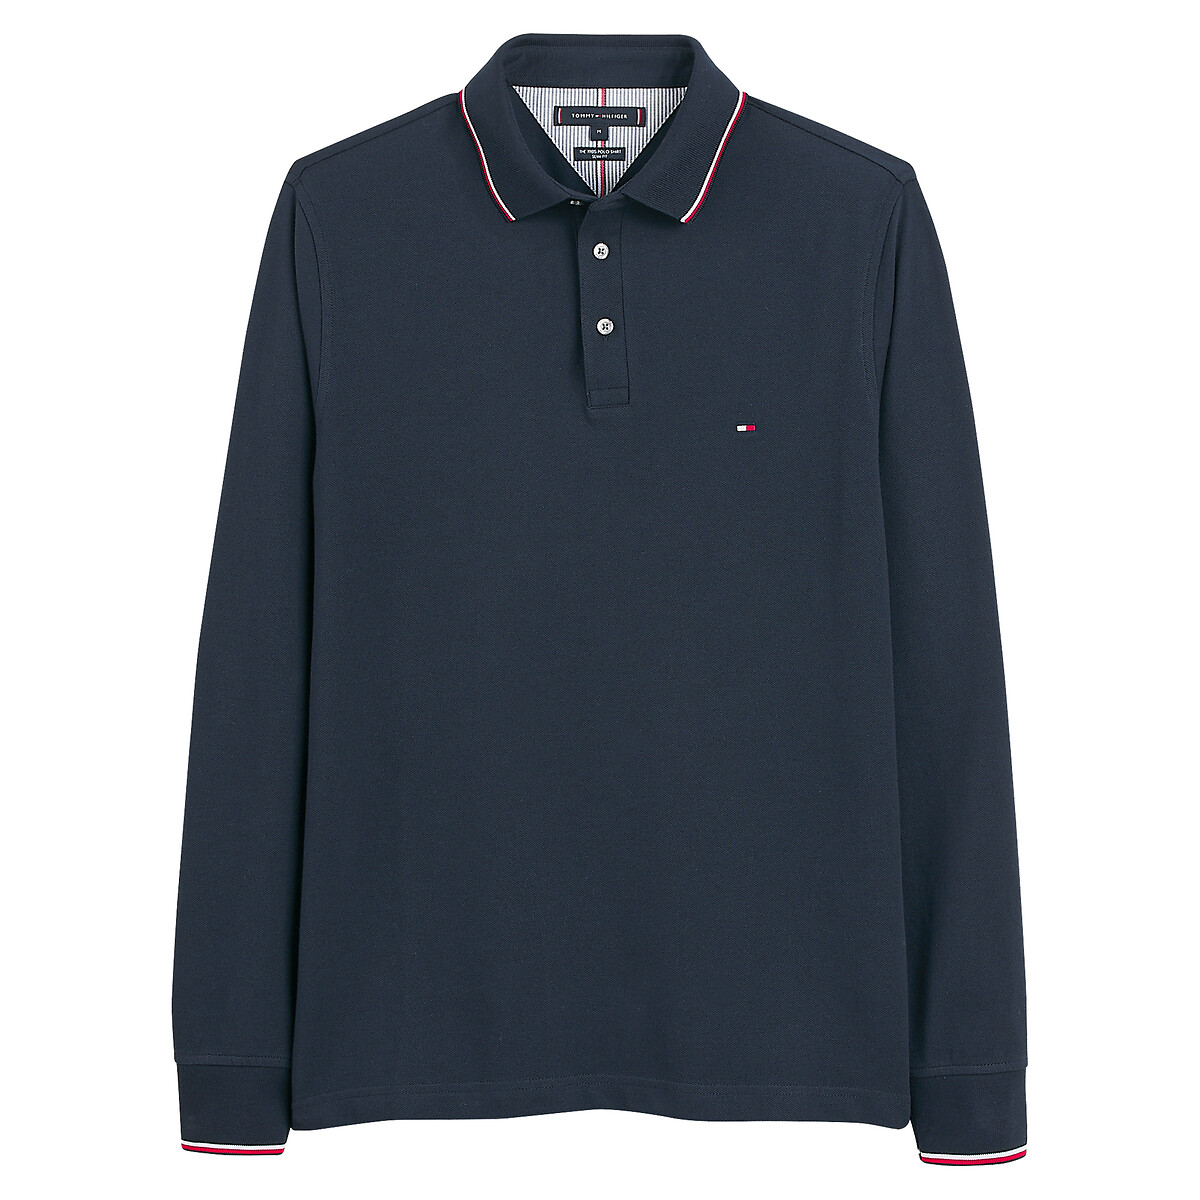 Image of 1985 Tipped Polo Shirt in Cotton with Long Sleeves, Slim Fit